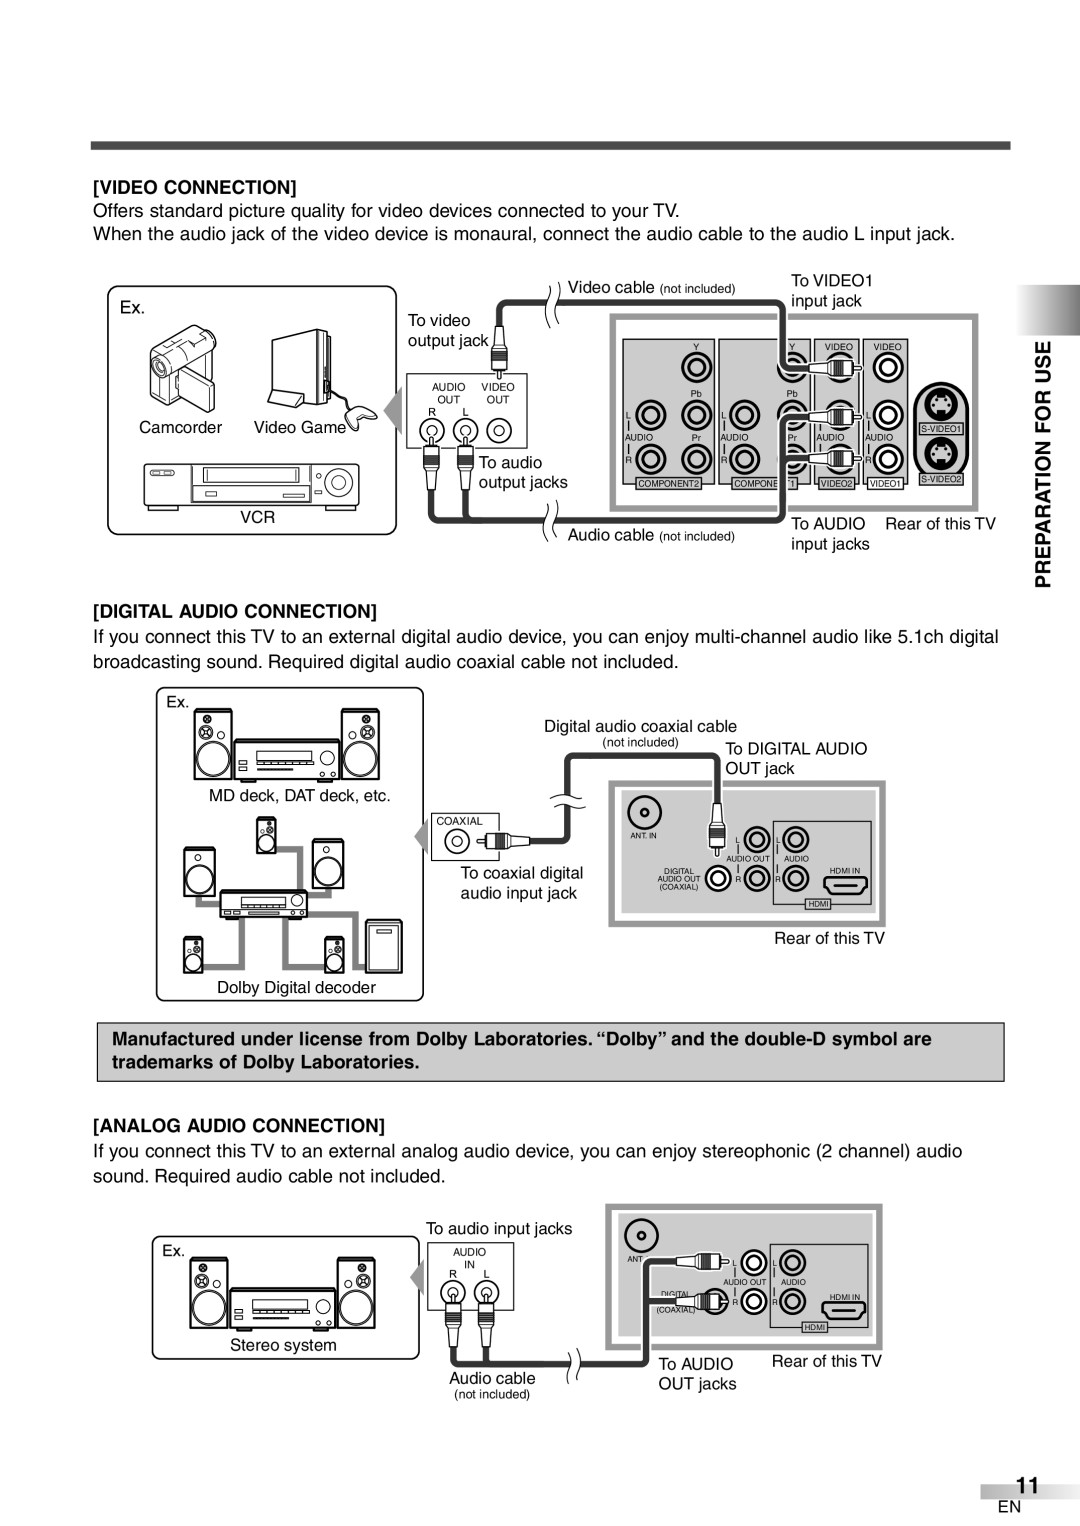 Emerson LC320EM8 owner manual For Use, Video Connection, Digital Audio Connection, Analog Audio Connection 